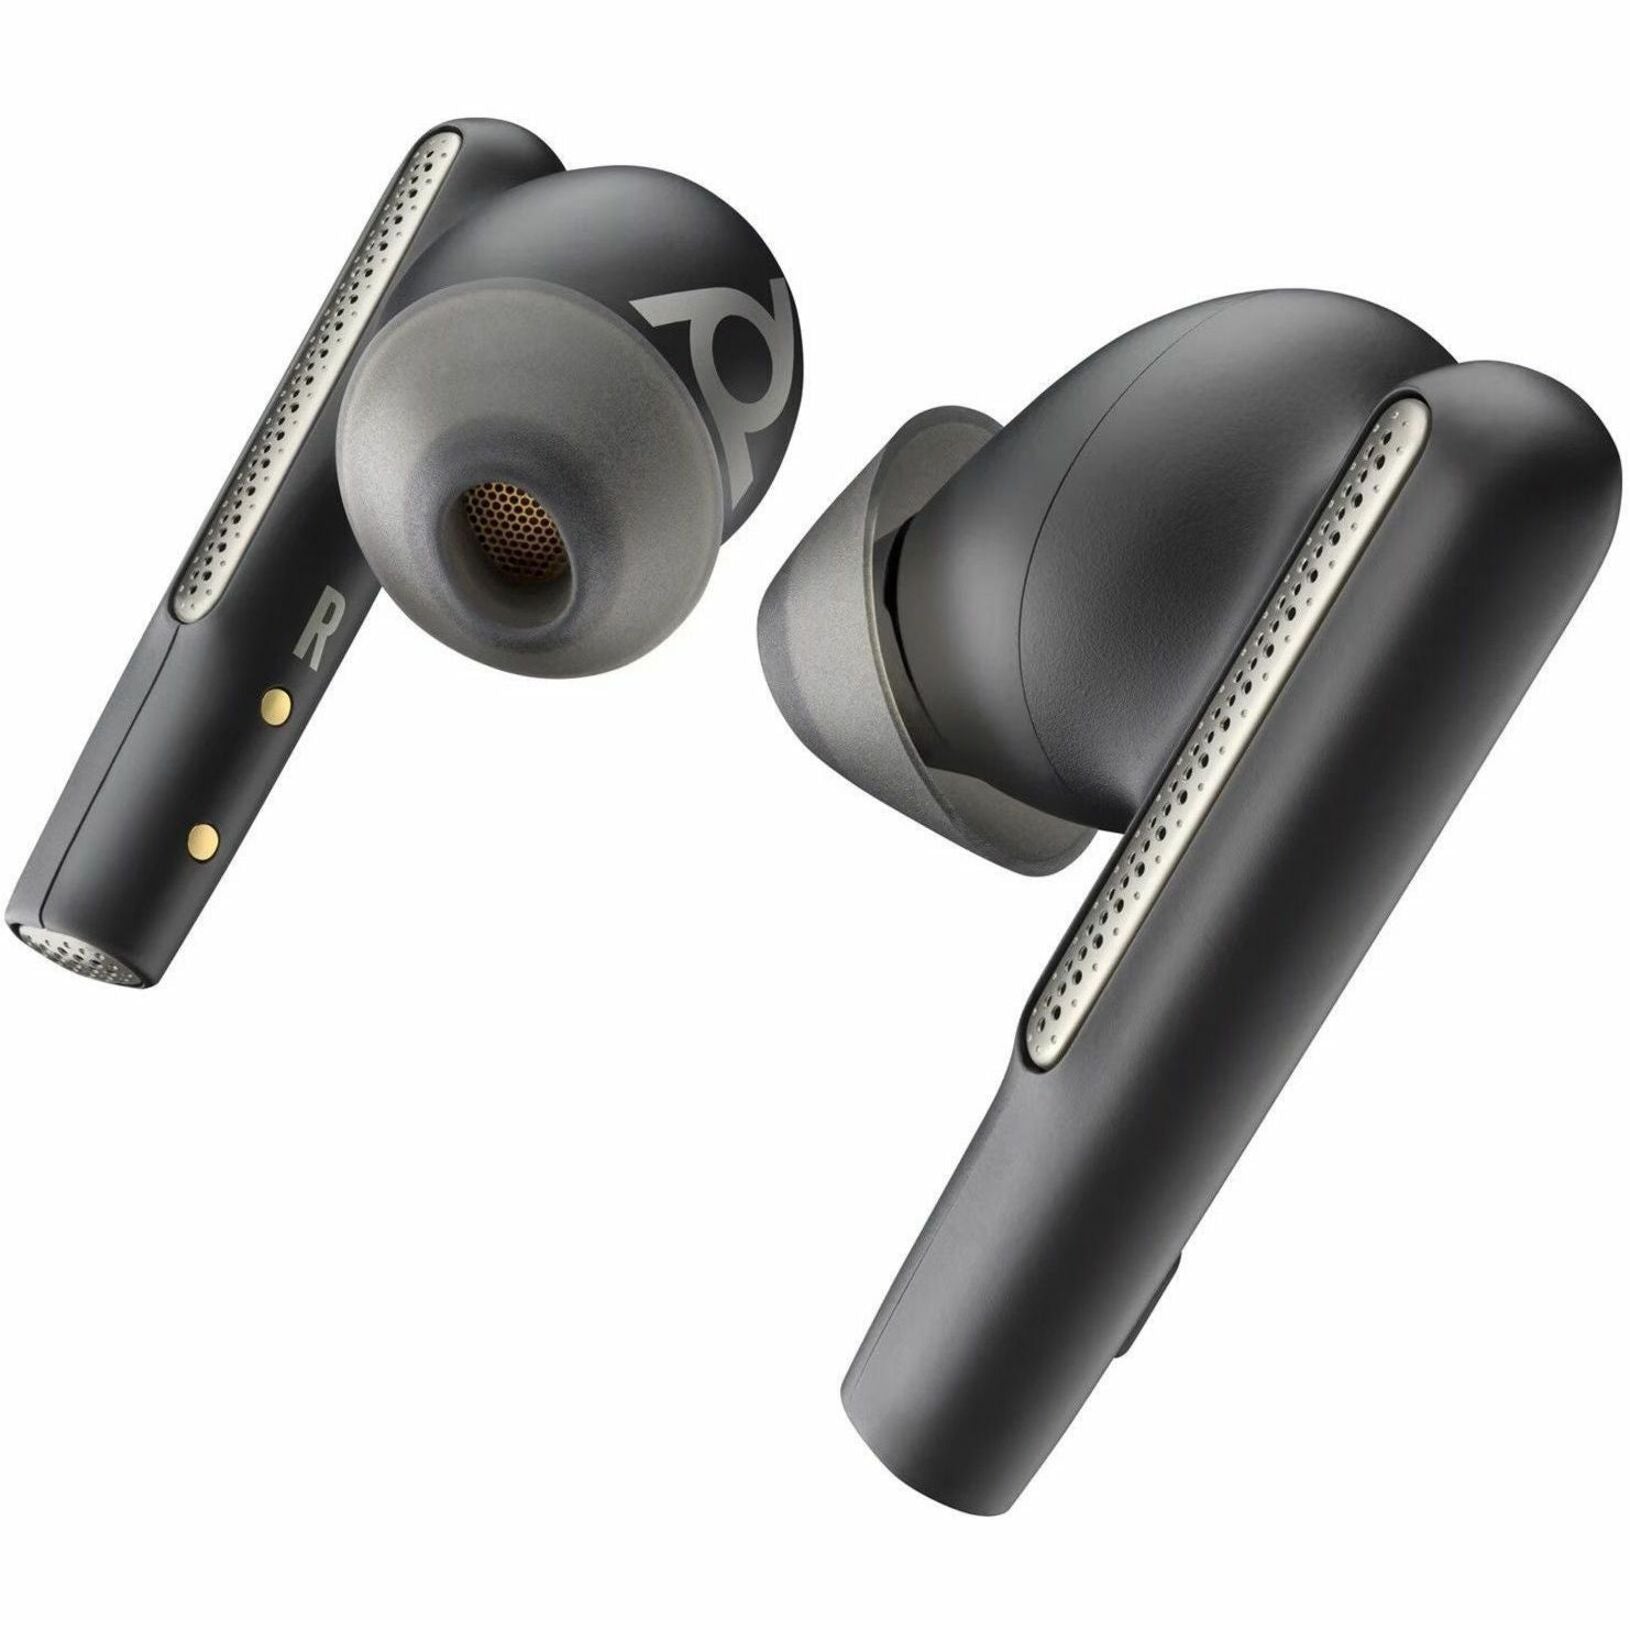 Poly 7Y8G3AA Voyager Free 60+ UC Earset, True Wireless Bluetooth 5.3 Earbuds with Hybrid Active Noise Cancelling, Carbon Black